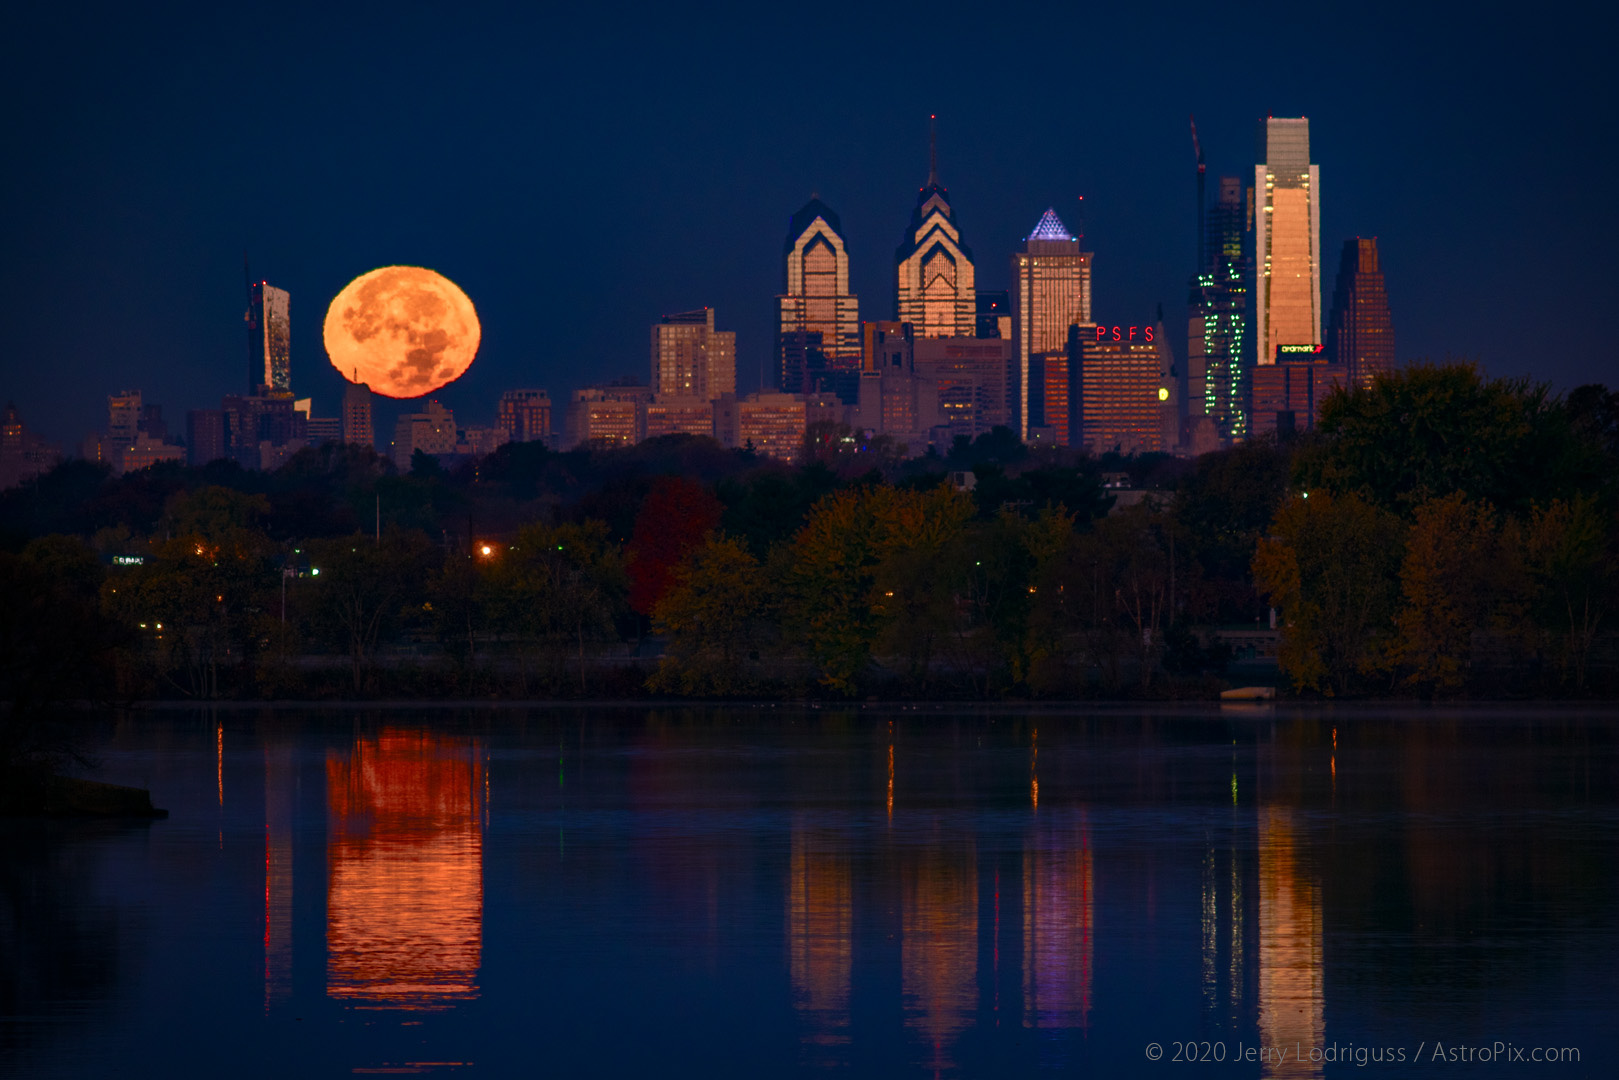 The Supermoon of November 14, 2016 sets as dawn lights up the buildings of the Philadelphia skyline.